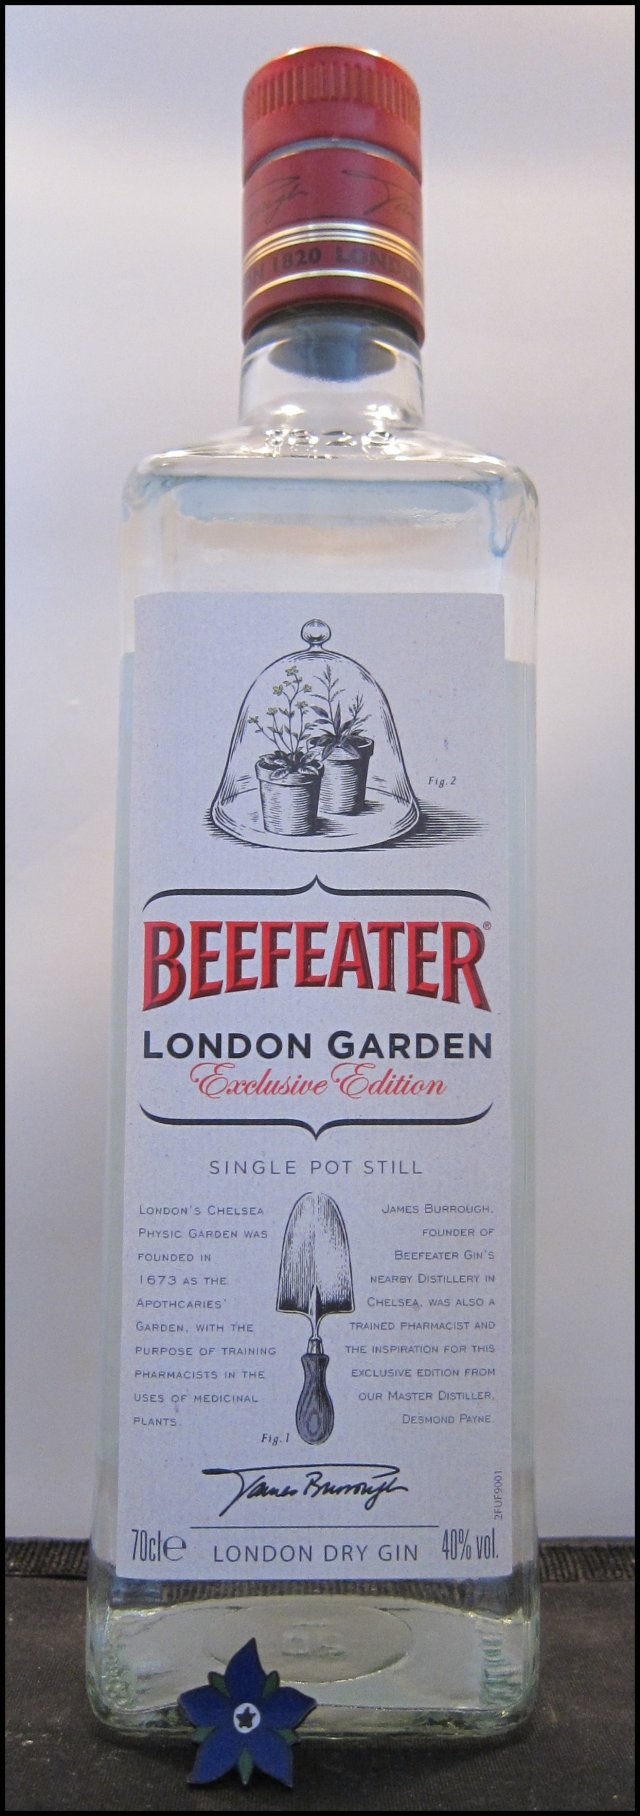 Cocktails with… Beefeater London Garden Gin – With Bonus Beefeater Gin! |  Summer Fruit Cup | Gin